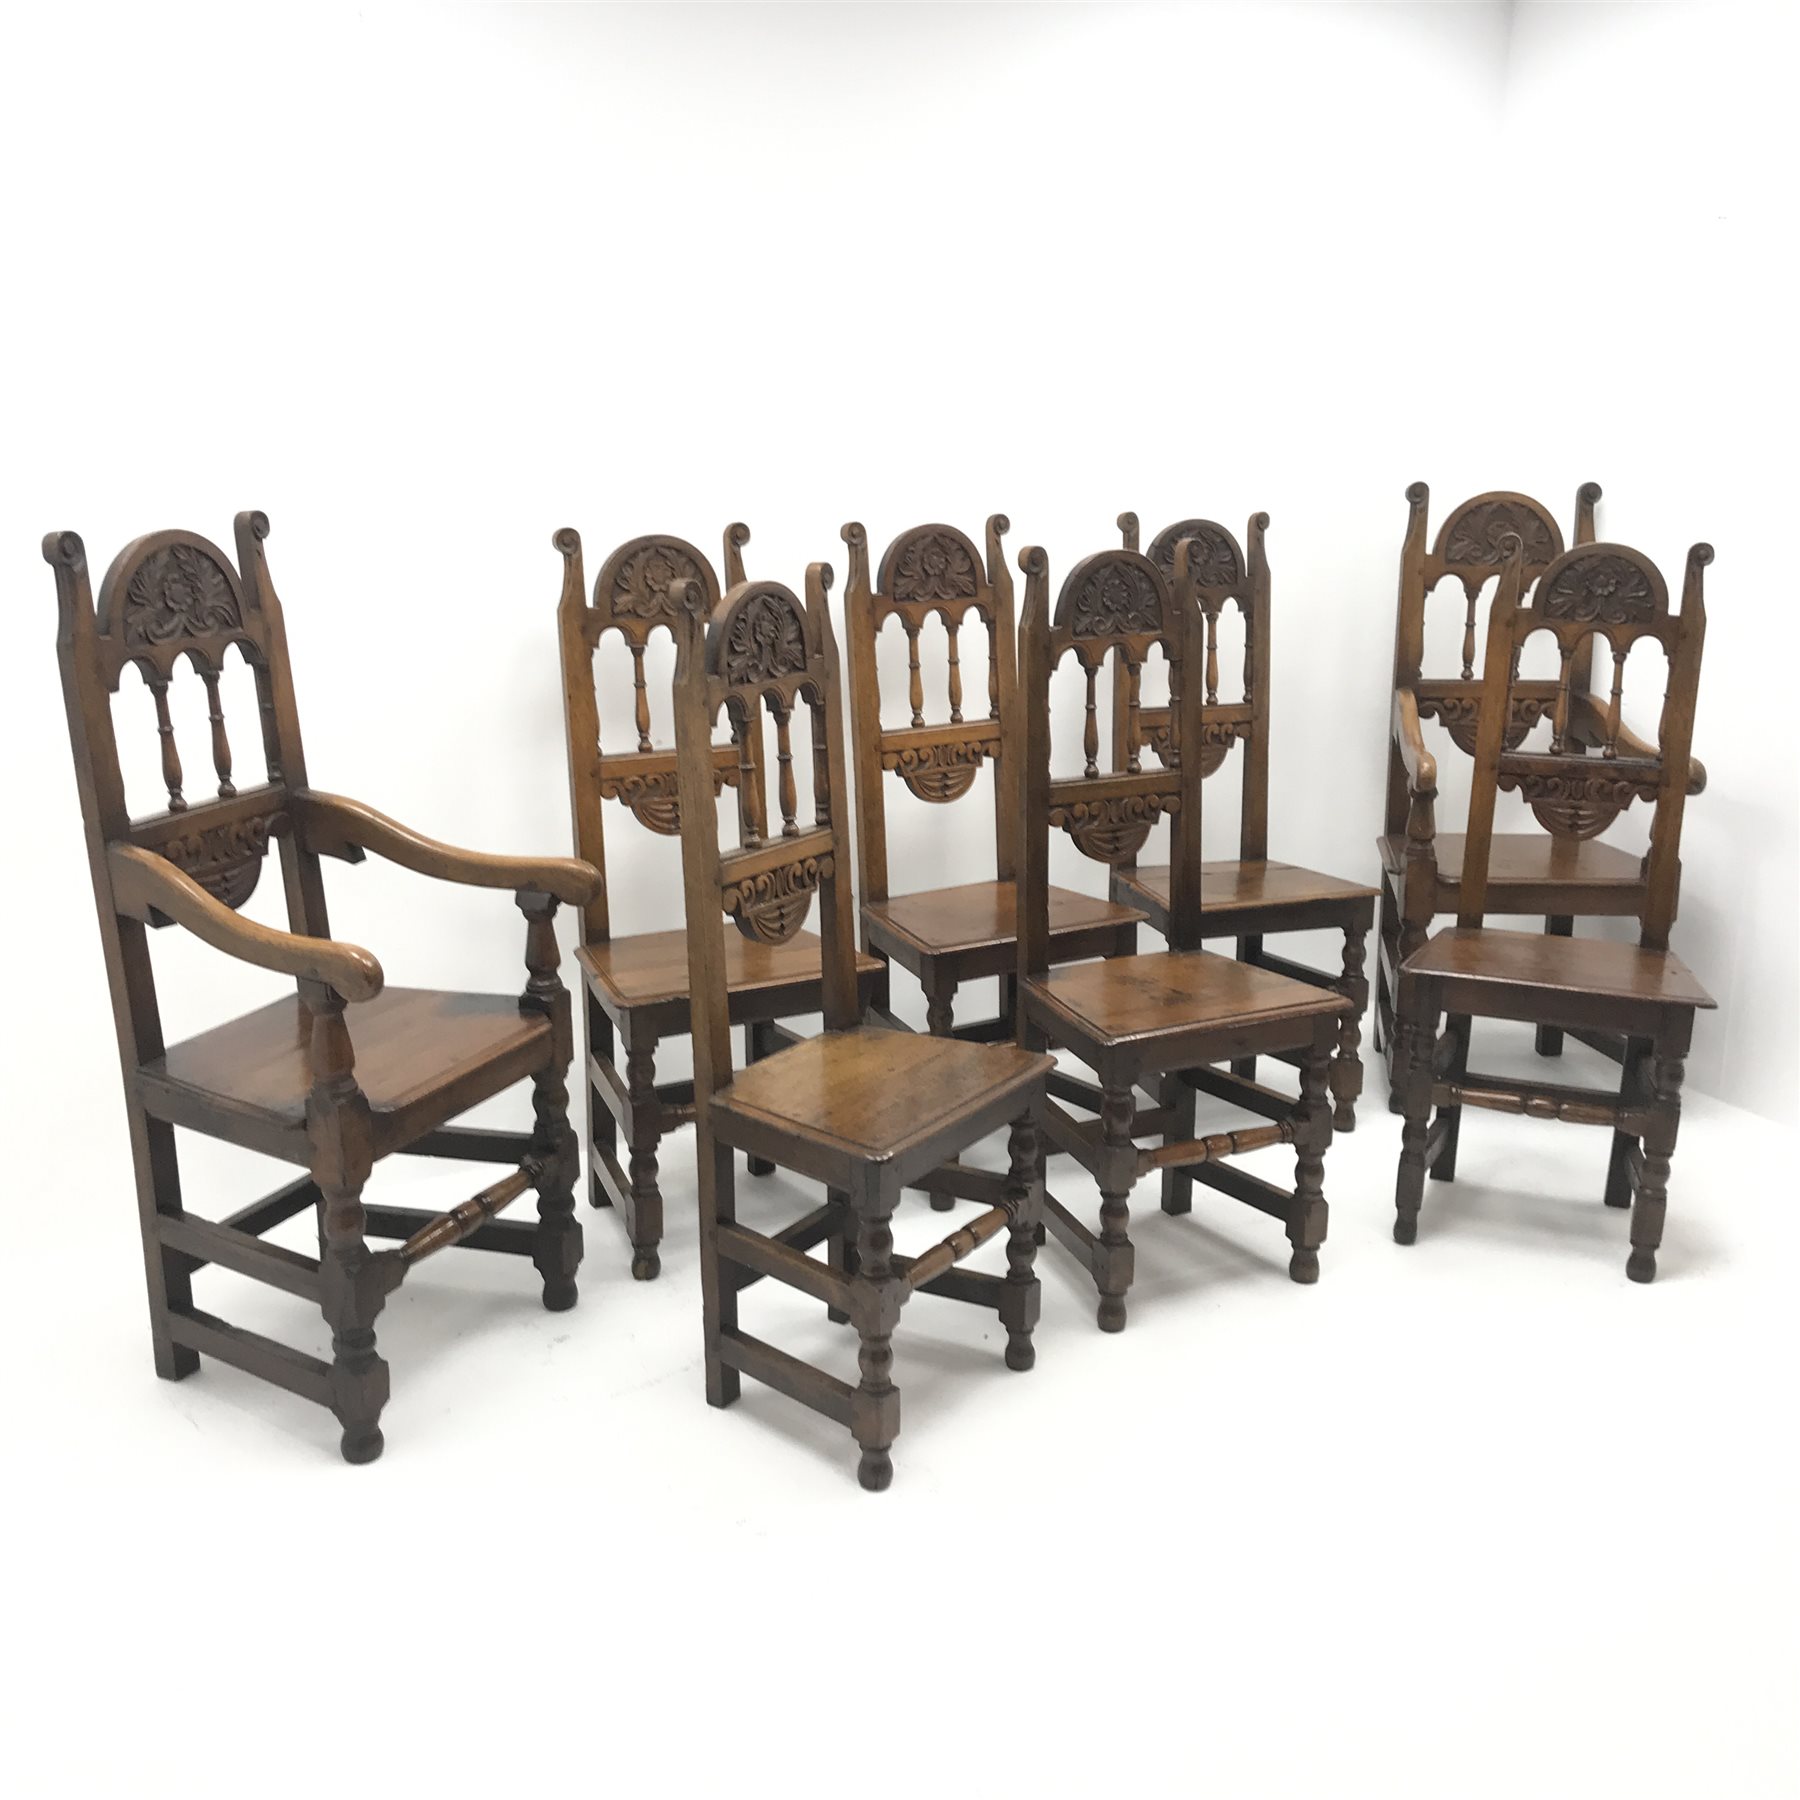 Set eight (6+2) early 20th century oak dining chairs, floral carved cresting rail, solid seat, turn